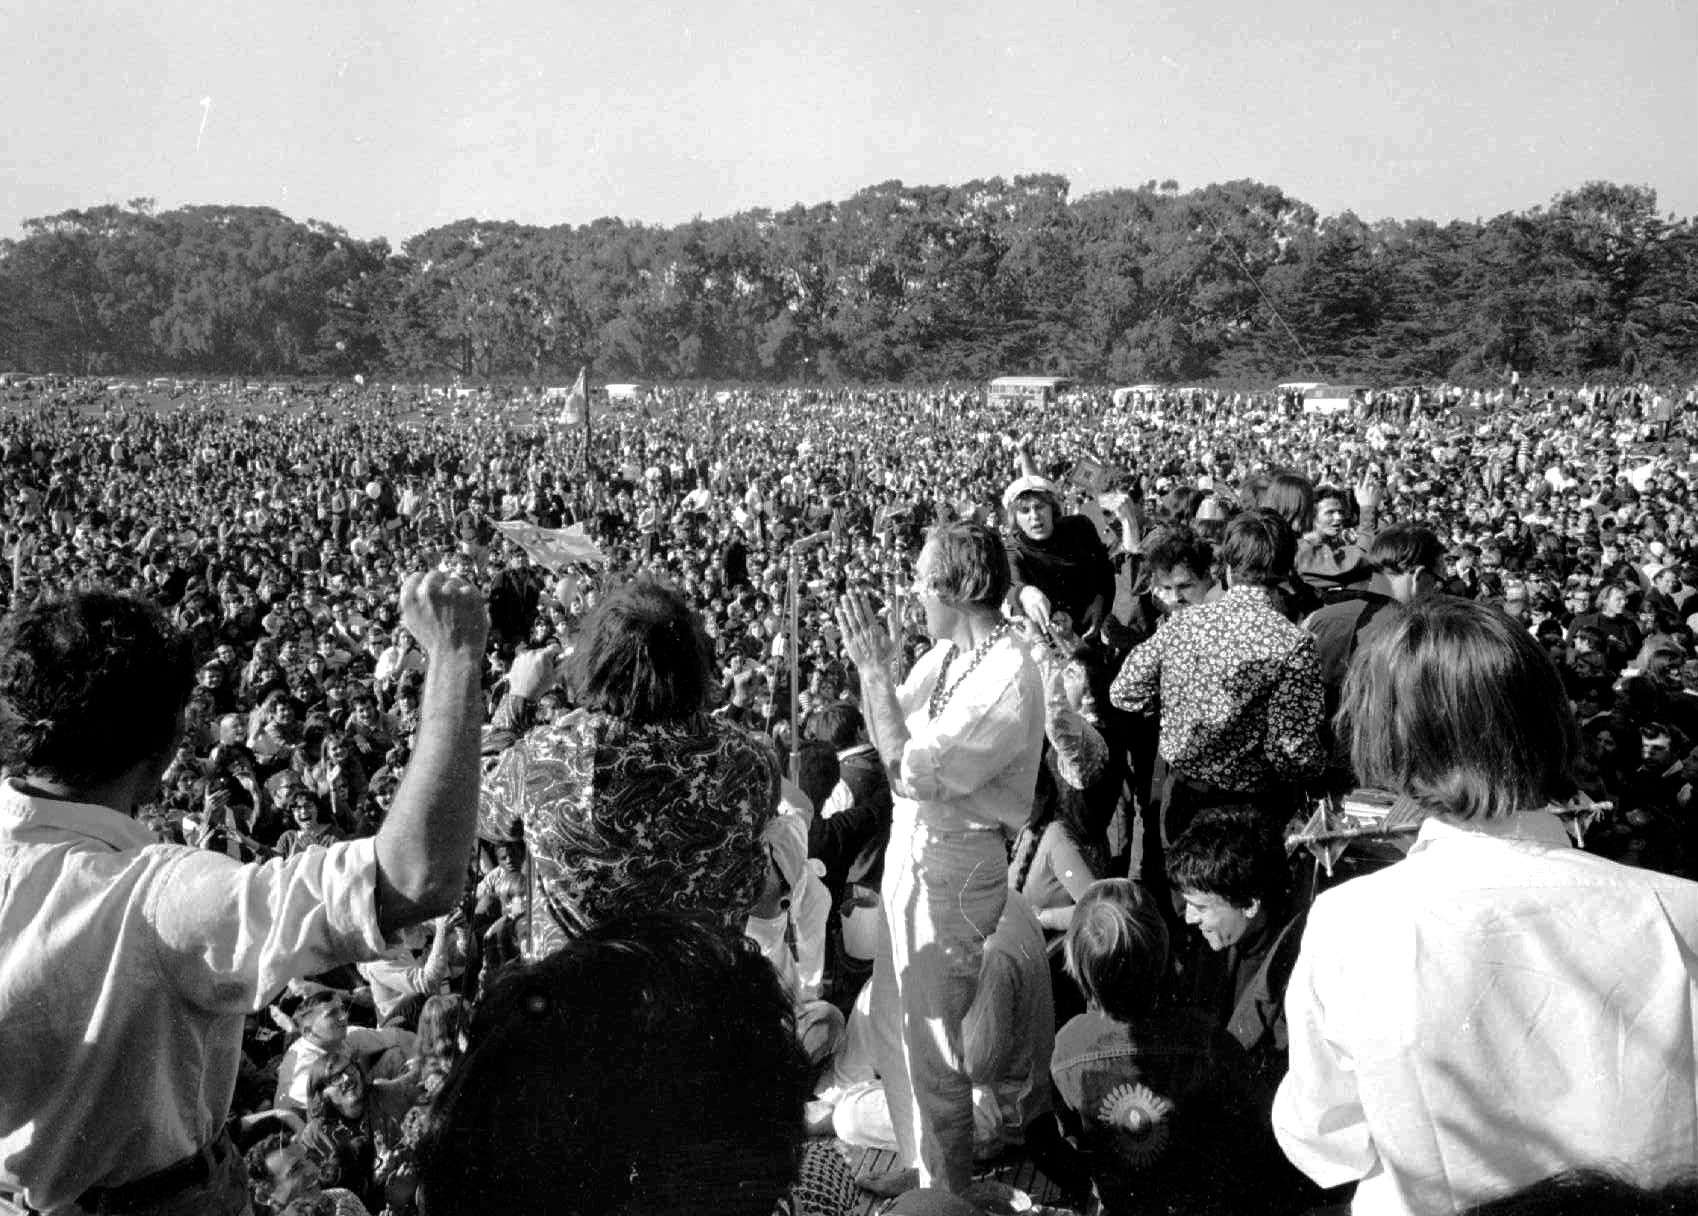 FILE - In this Jan. 15, 1967 file photo, Timothy Leary, center, leads thousands in a song at the "Human Be-In" on the Golden Gate Park Polo Fields in San Francisco. Dennis McNally, who has curated an exhibit at the California Historical Society, says the national media paid little attention to San Francisco's psychedelic community until January 1967, when poets and bands joined forces for the “Human Be-In,” which unexpectedly drew about 50,000 people. Leary stood on stage and delivered his famous mantra: “Turn on. Tune In. Drop out.” (AP Photo)